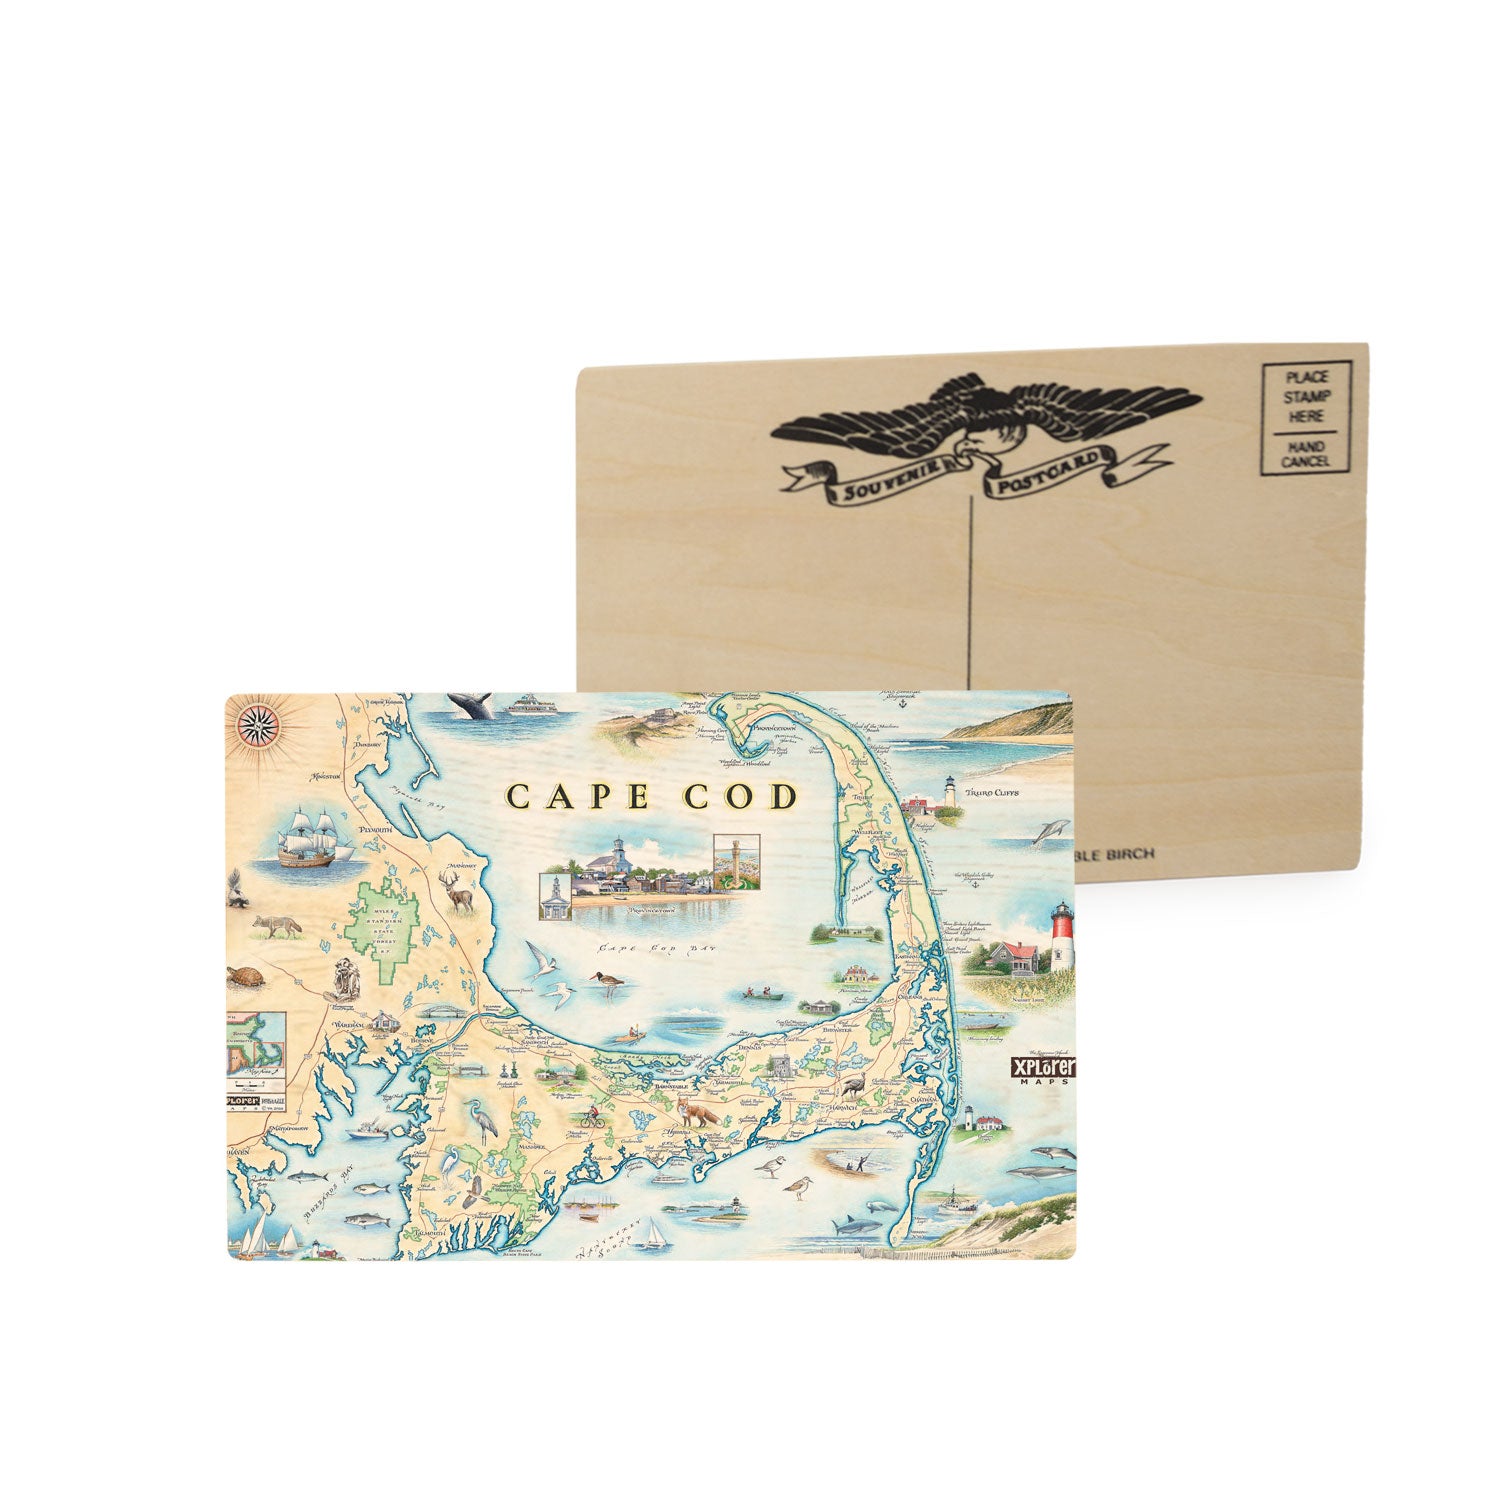 Cape Cod Map mailable wooden postcards in earth tone colors. Featuring Plymouth Rock, fish, crane, fox, Provincetown, canoeing, biking, beach, lighthouse, and ocean.